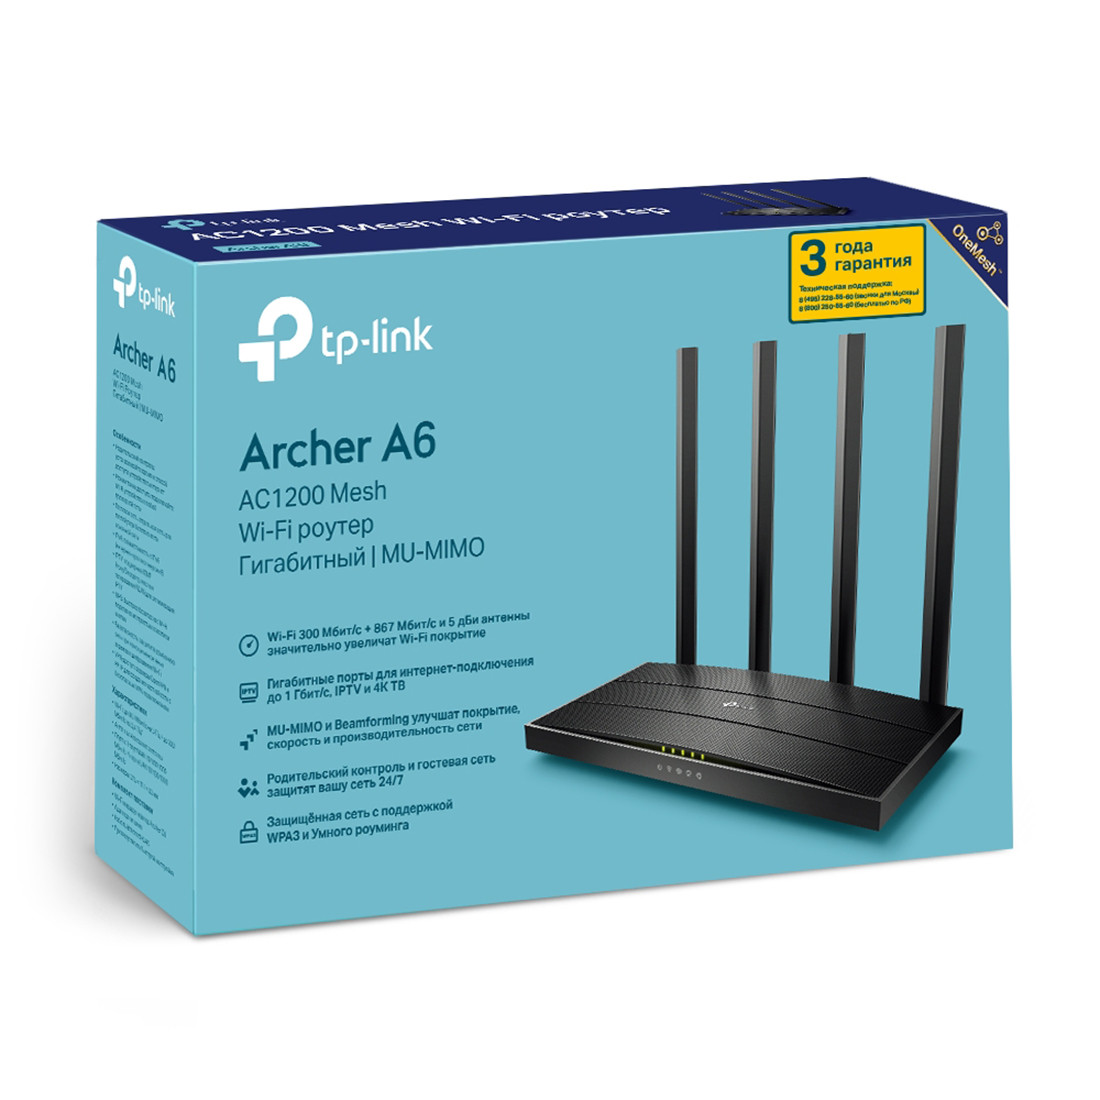 Маршрутизатор TP-Link Archer A6 - фото 3 - id-p108628340